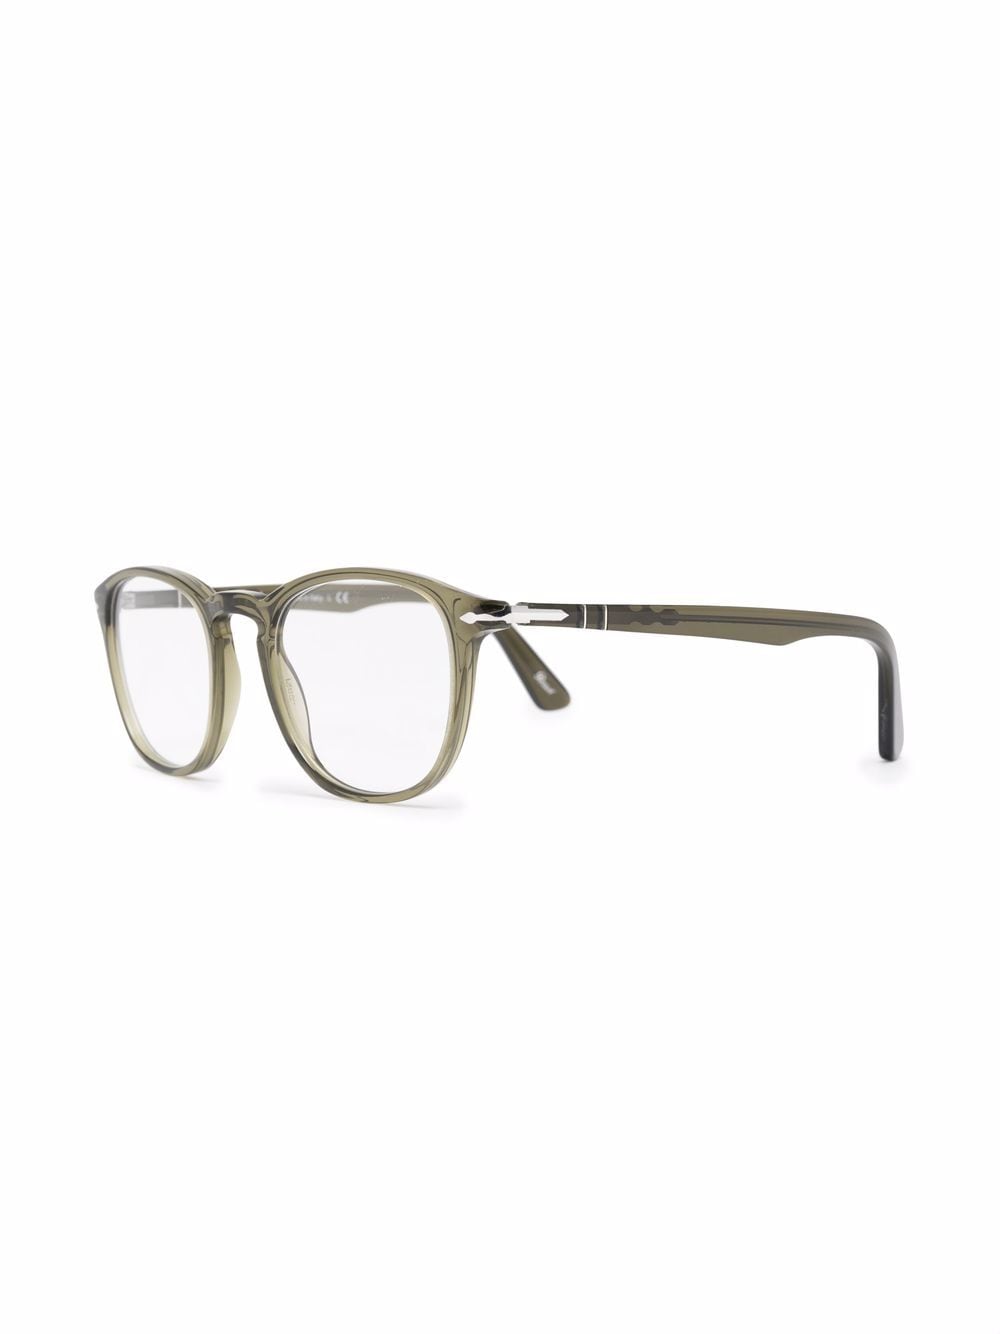 Image 2 of Persol transparent round-frame glasses